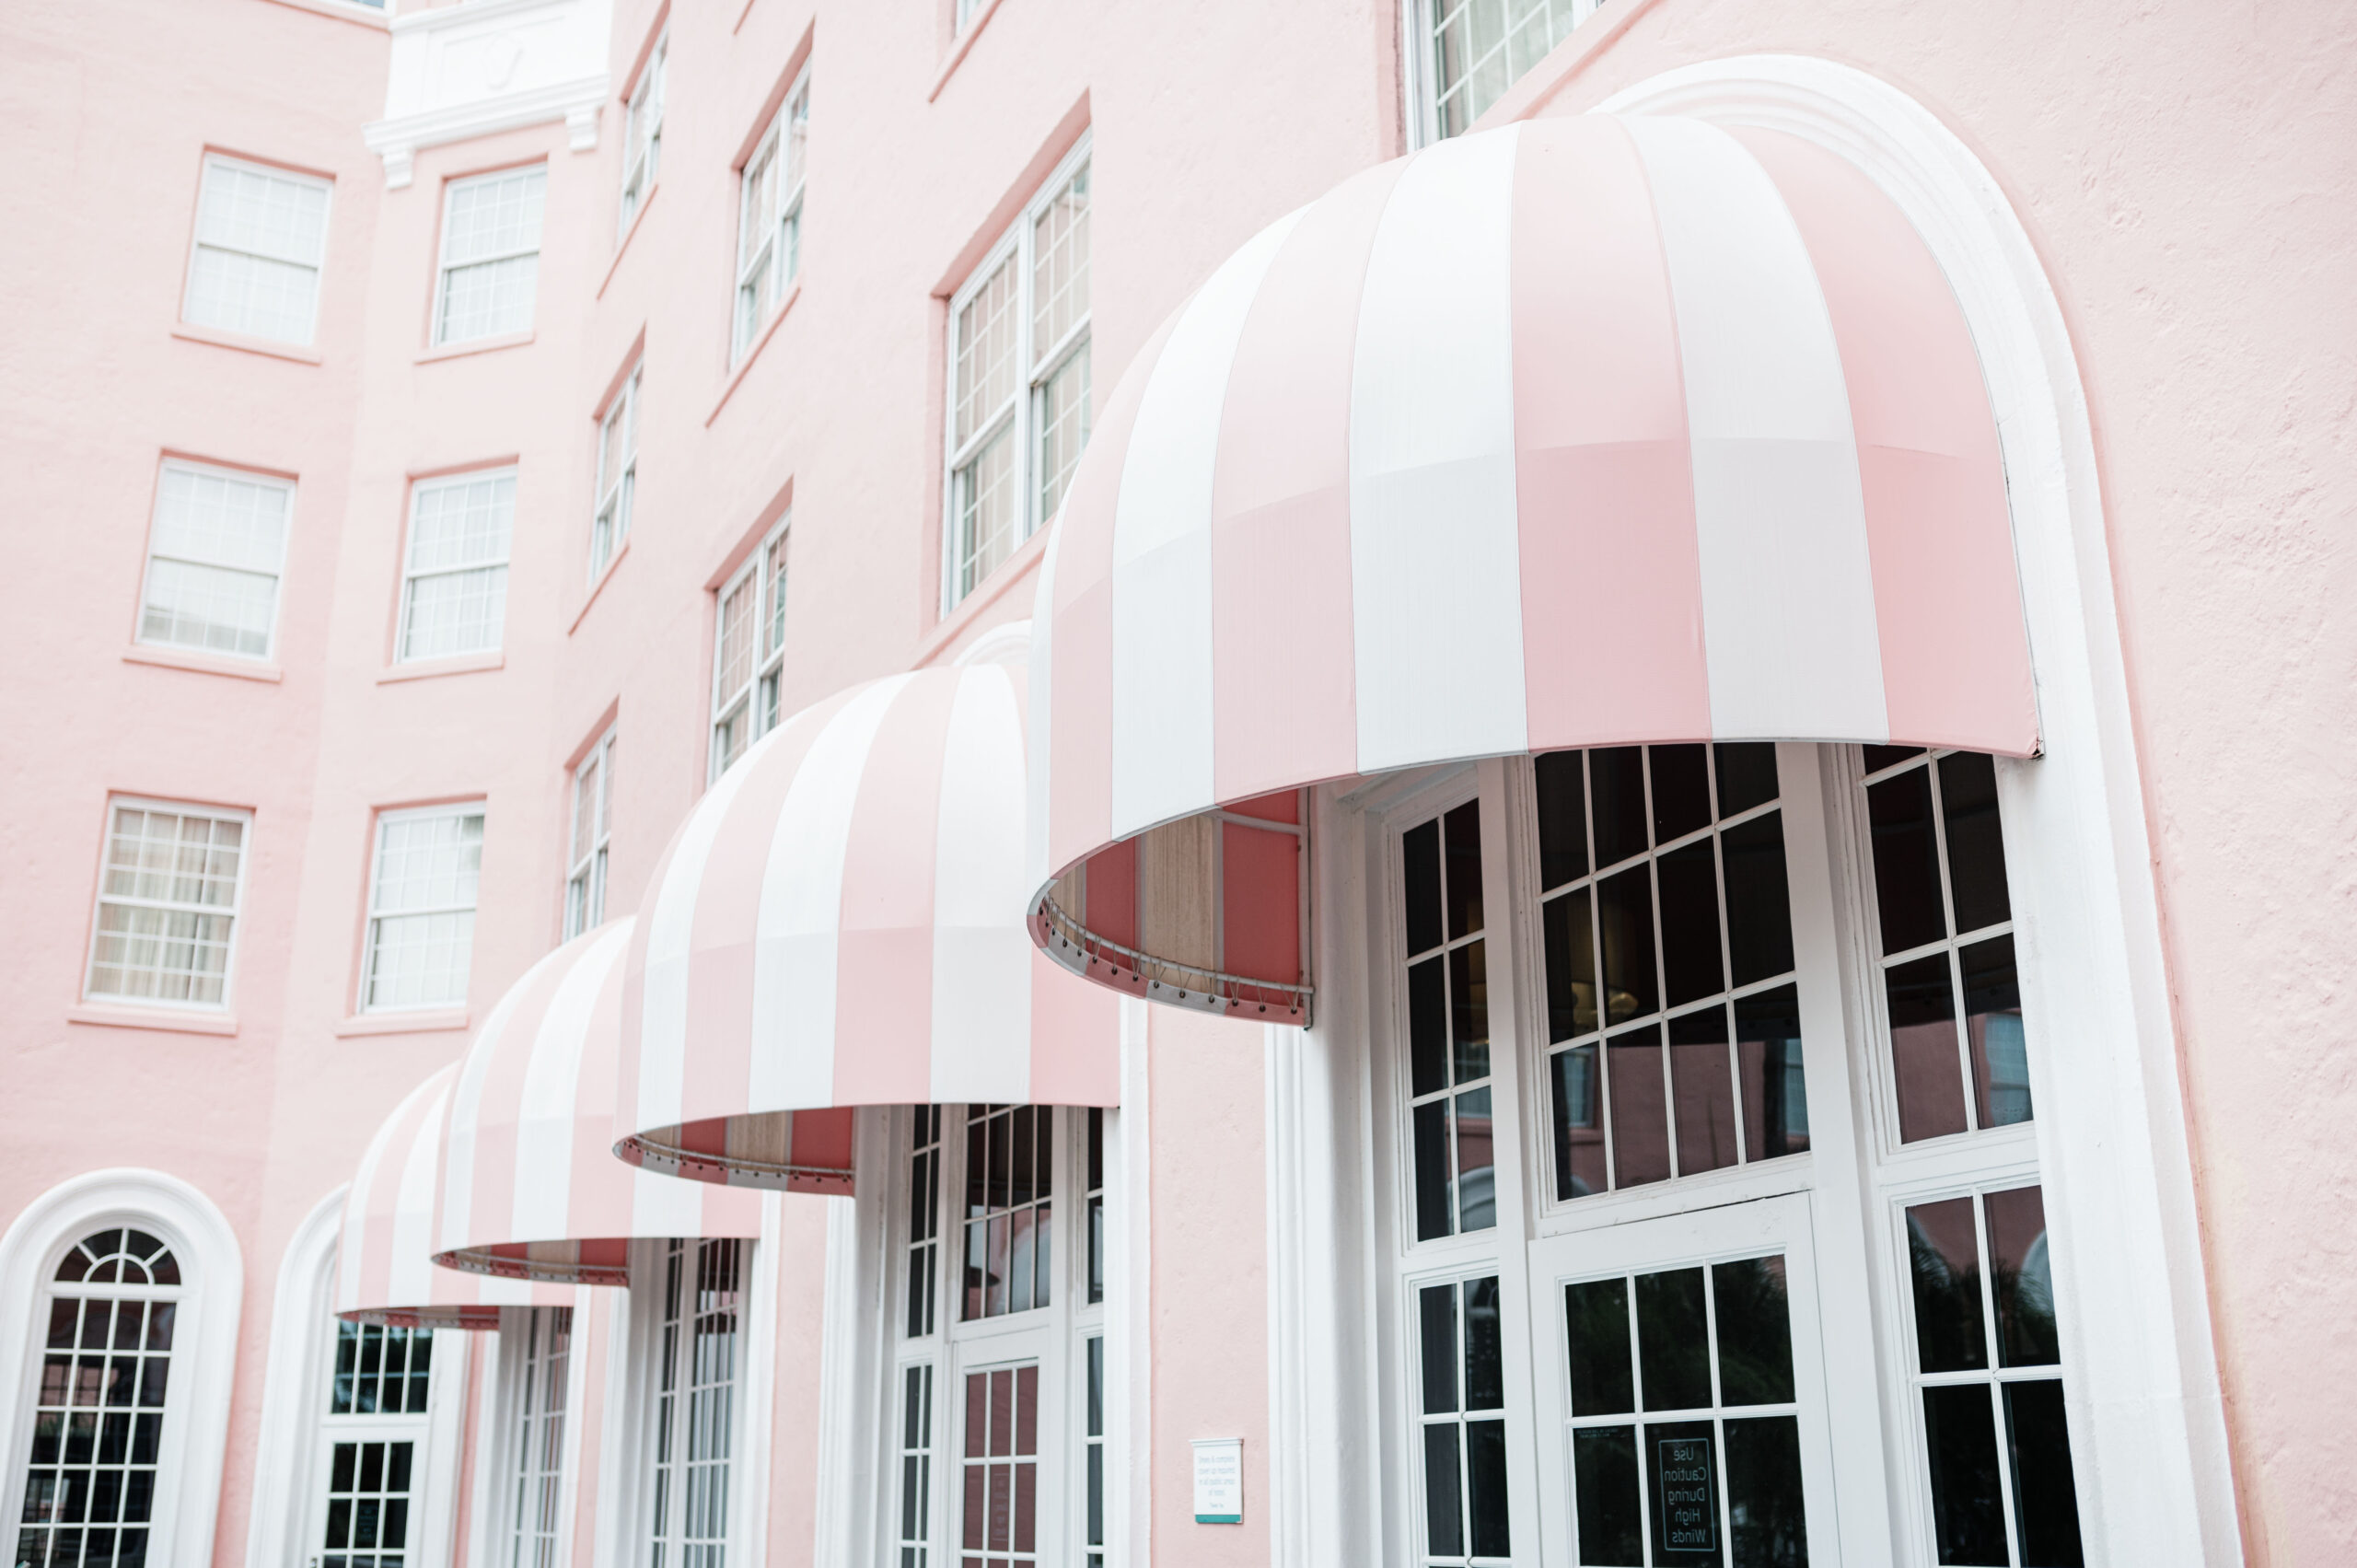 Pink and white awnings at The Pink Palace, The Don CeSar